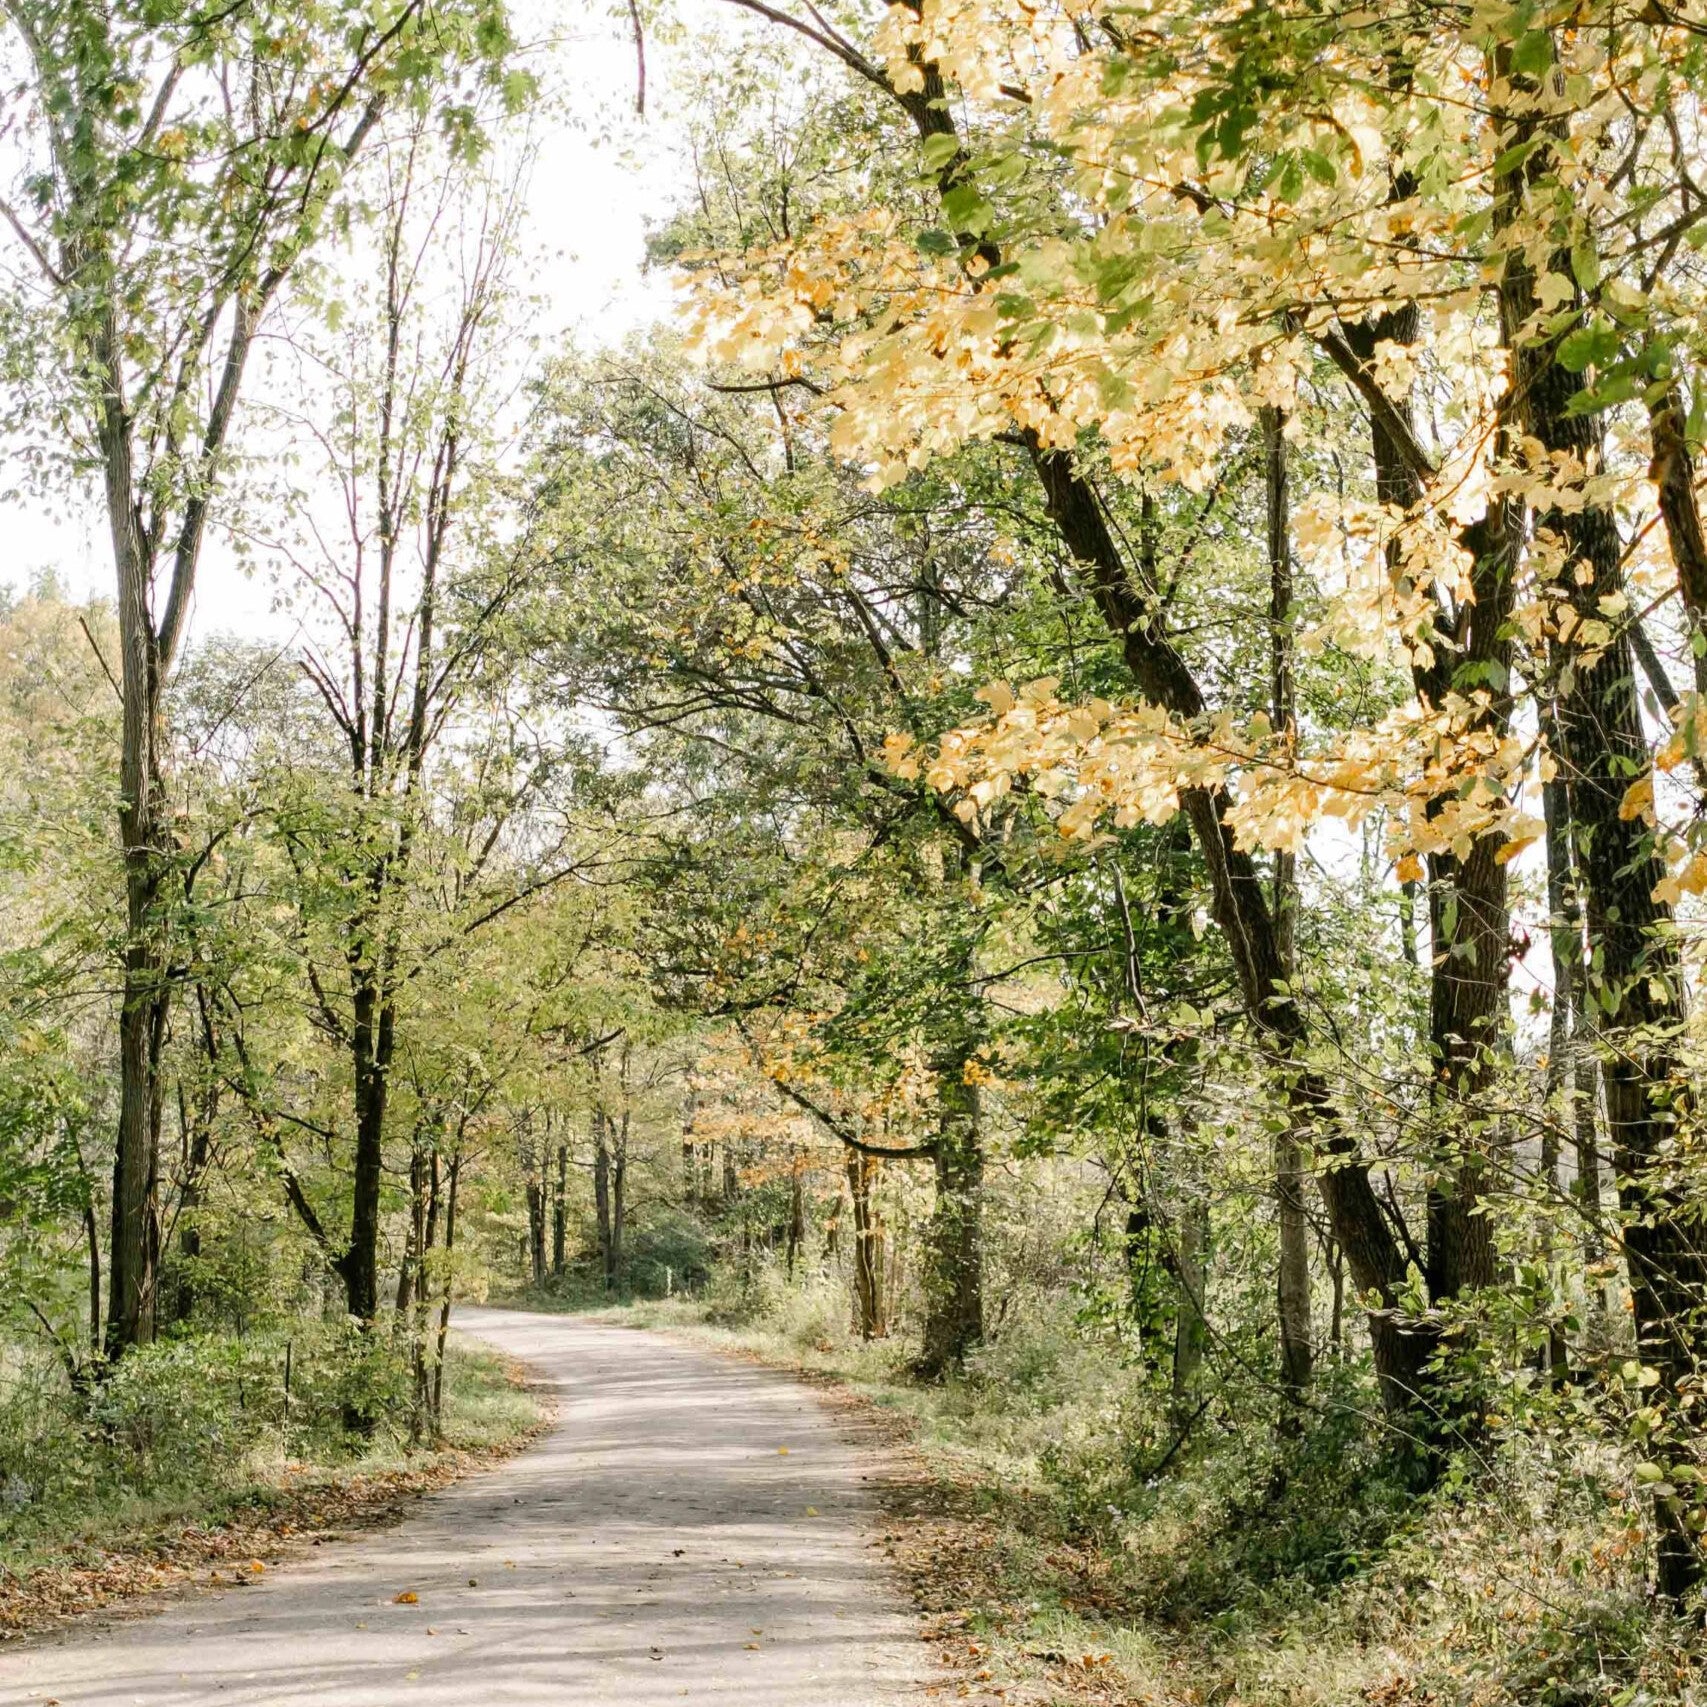 Tranquil road meandering through an autumnal forest with vibrant fall colors, symbolizing the serene journey towards quiet contentment, illustrating the concept of redefining success.